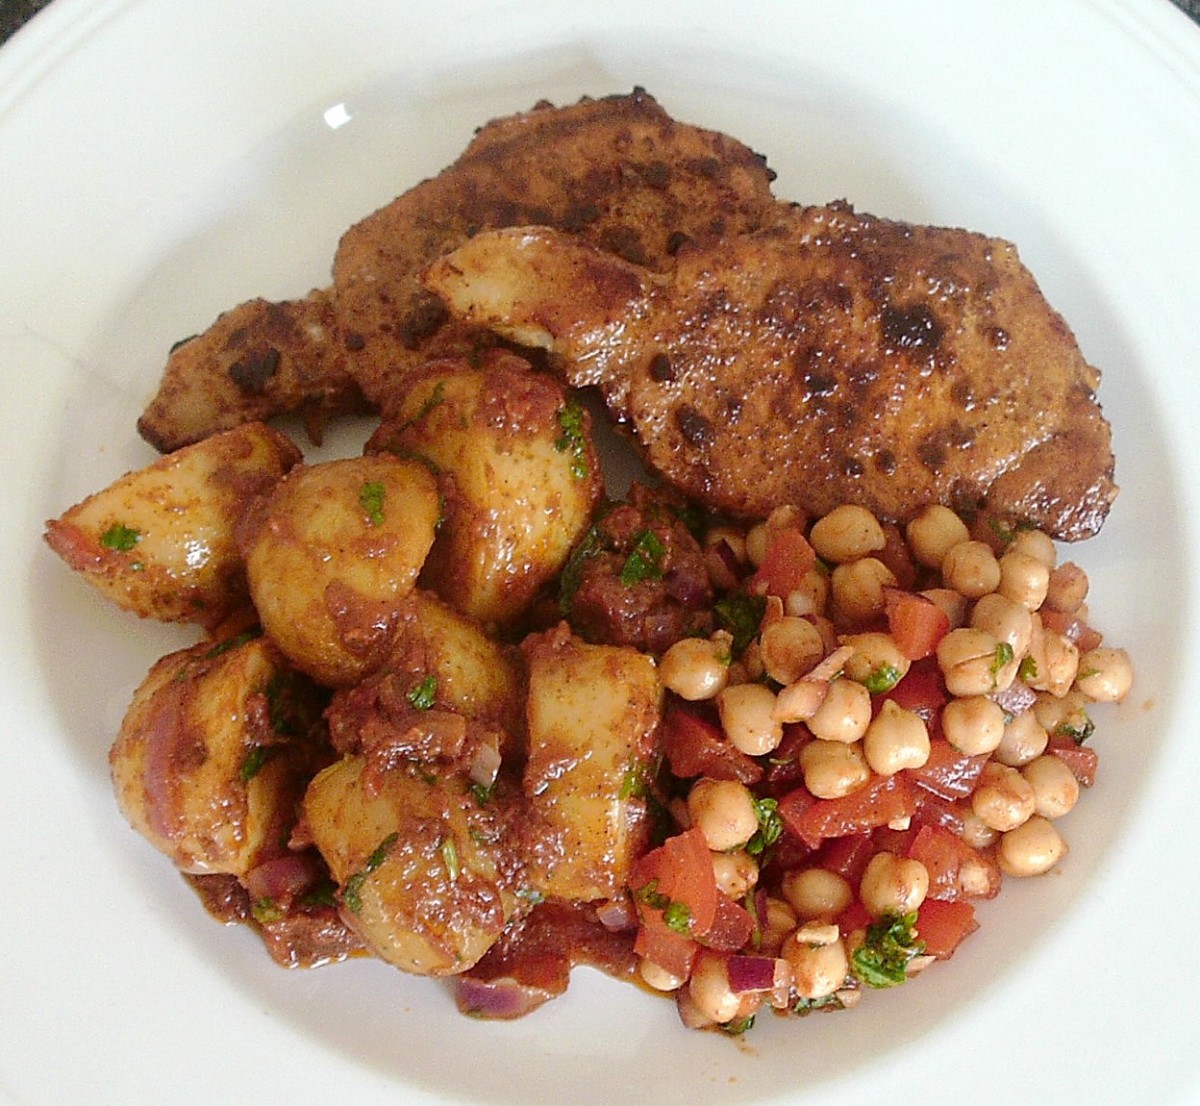 Chilli spiced pork with potato curry and spicy chickpea salad